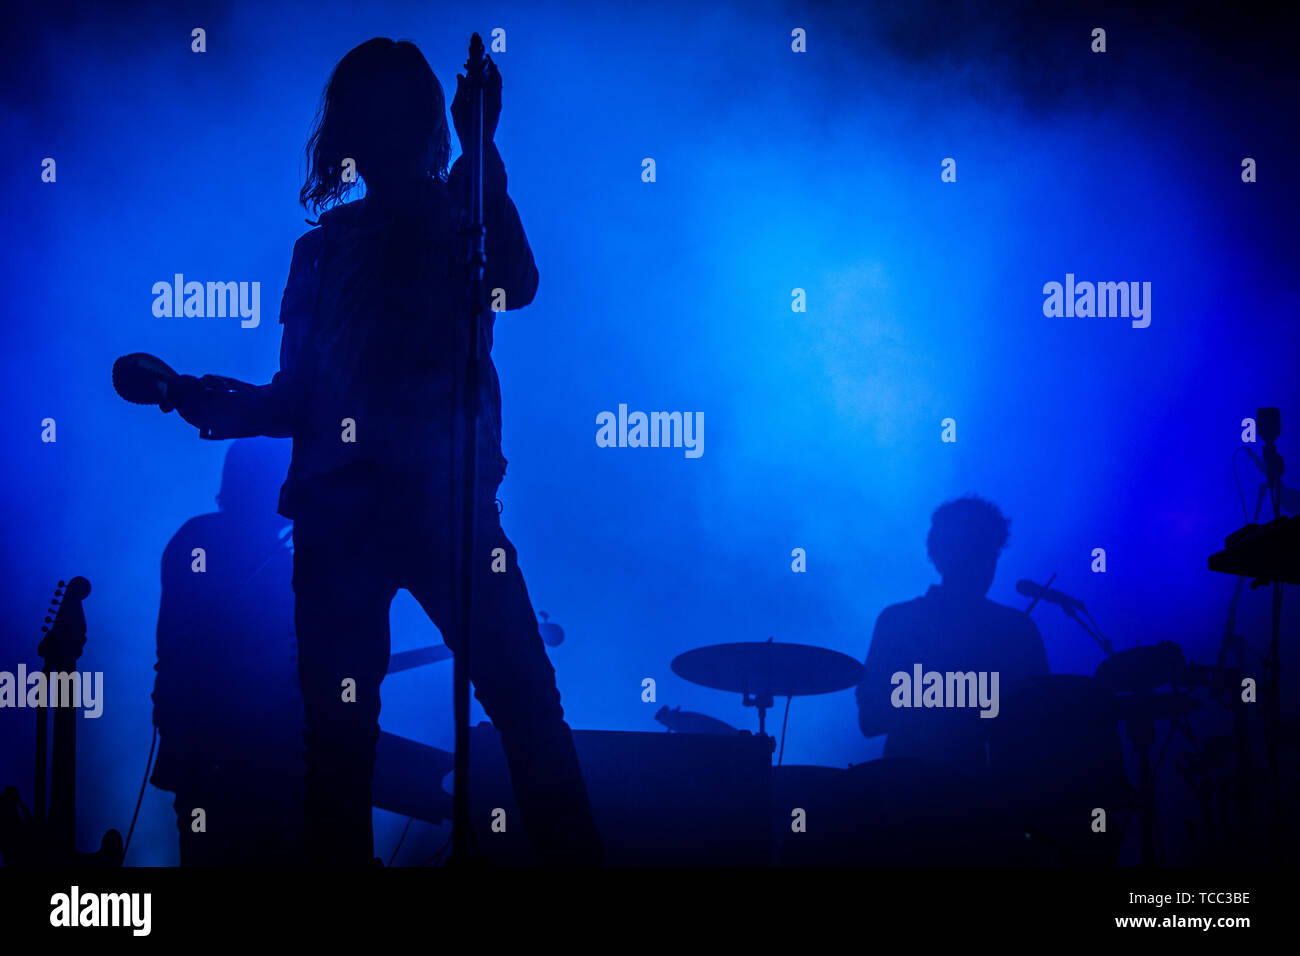 Aarhus, Denmark. 06th June, 2019. Denmark, Aarhus - June 6, 2019. The Australian musical project Tame Impala performs a live concert during the Danish music festival Northside 2019 in Aarhus. Here guitarist and musician Kevin Parker is seen live on stage. (Photo Credit: Gonzales Photo/Alamy Live News Stock Photo